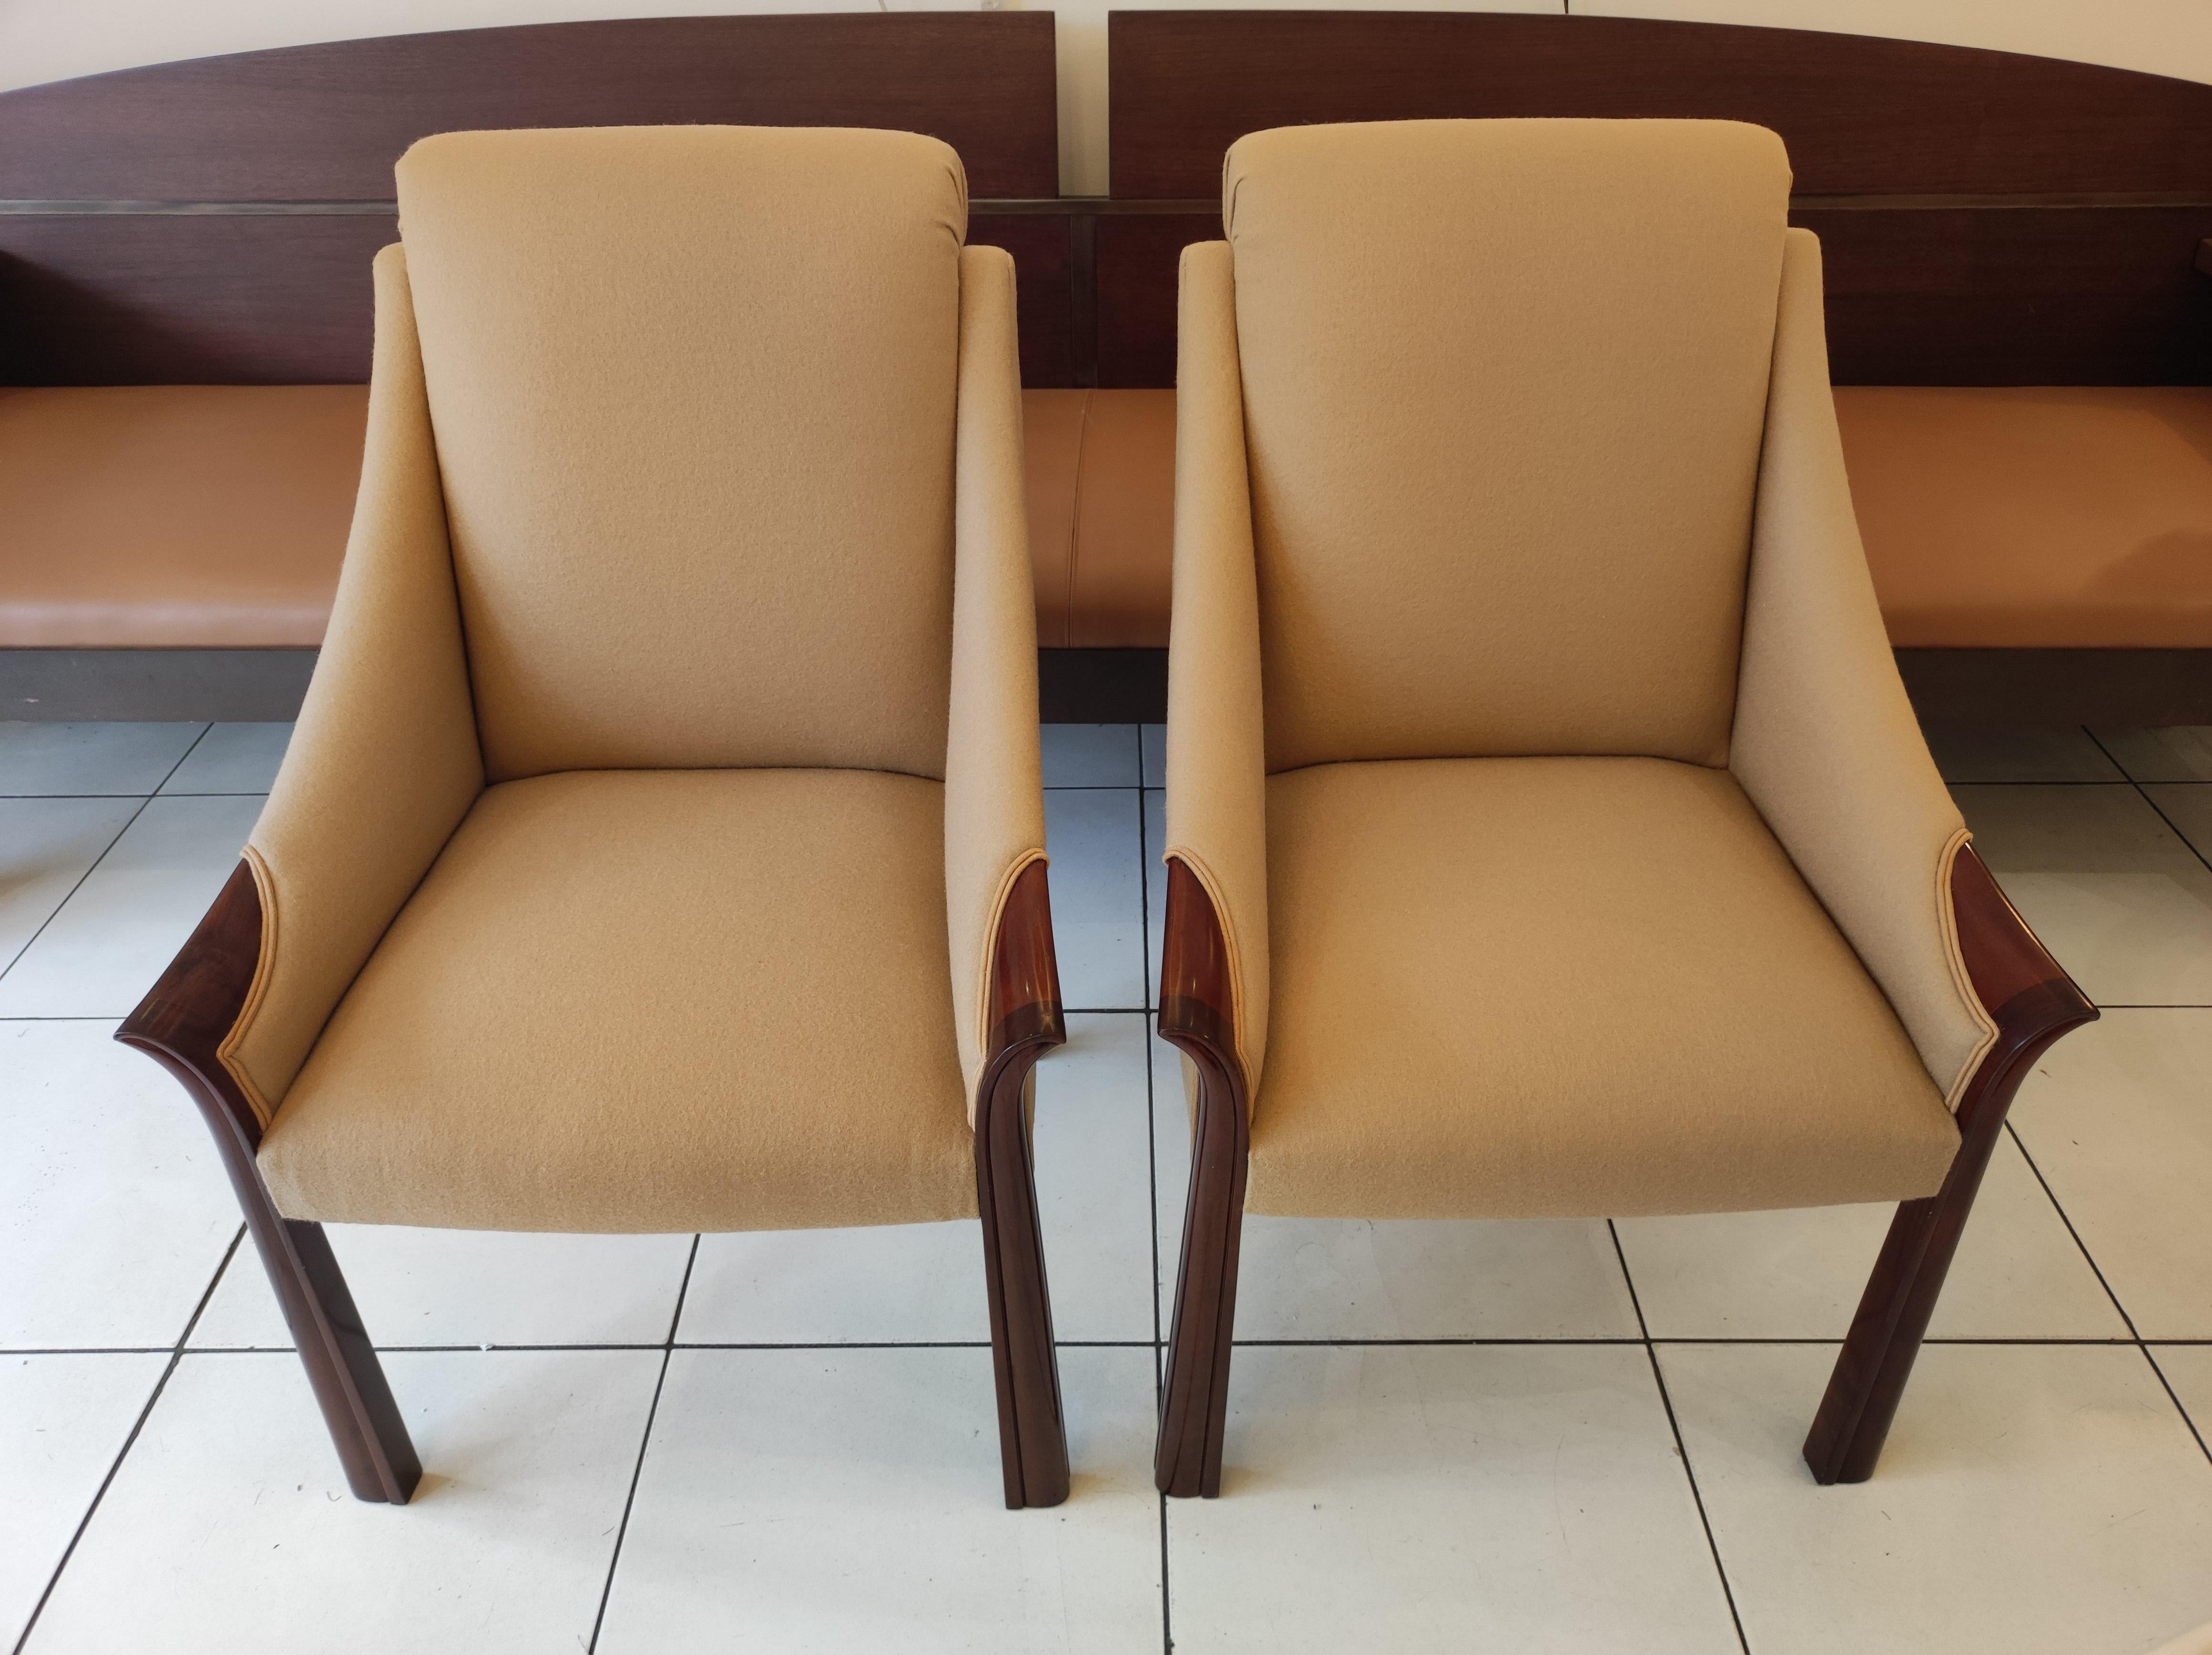 Pair of Moret Chairs, circa 1930 In Excellent Condition For Sale In Saint-Ouen, FR